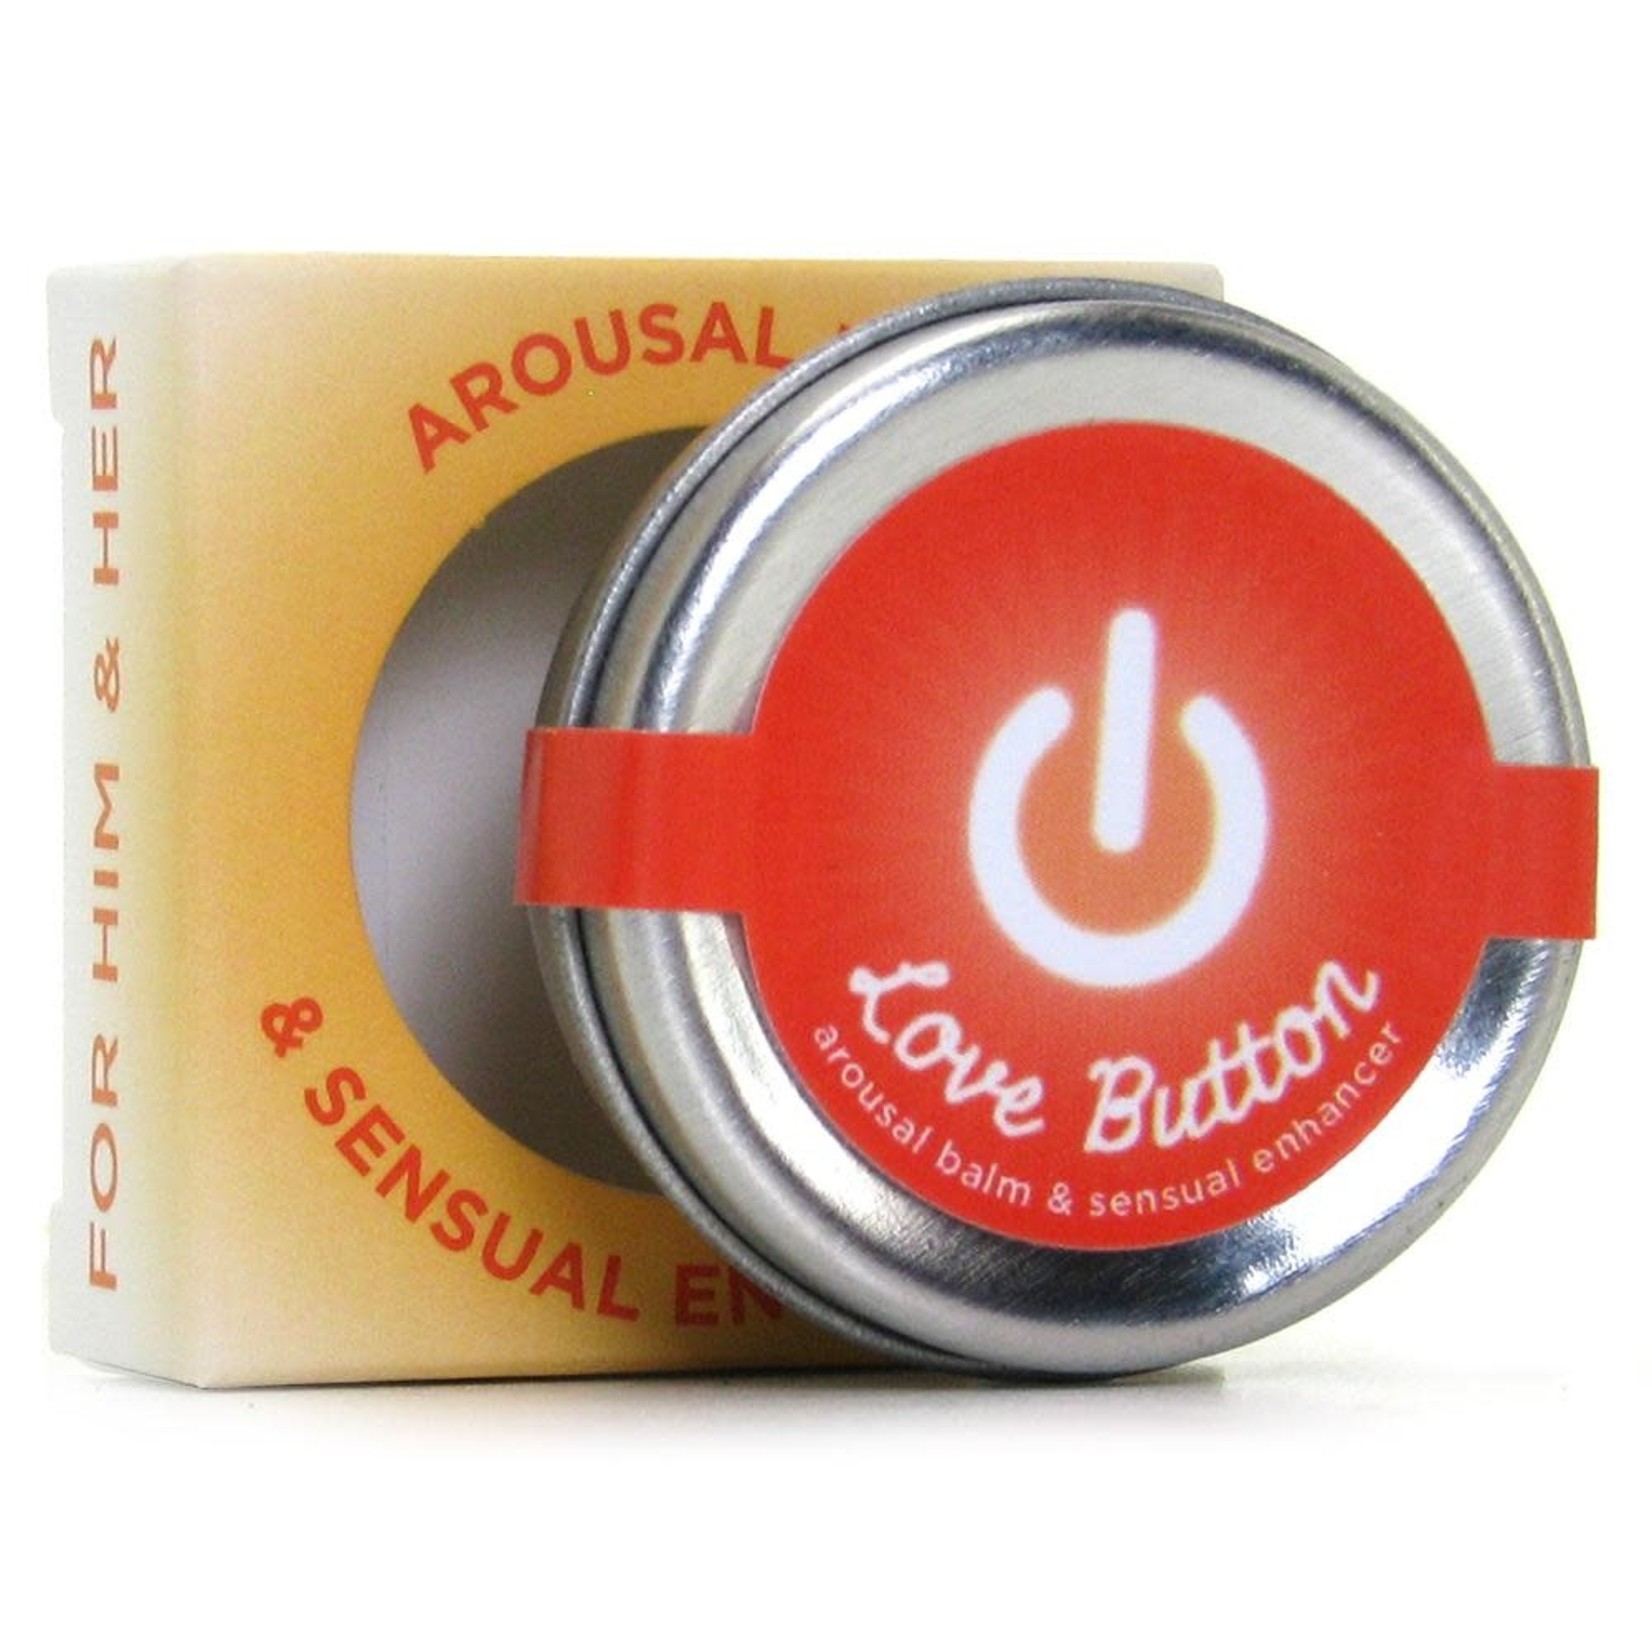 EARTHLY BODY EARTHLY BODIES - LOVE BUTTON AROUSAL BALM